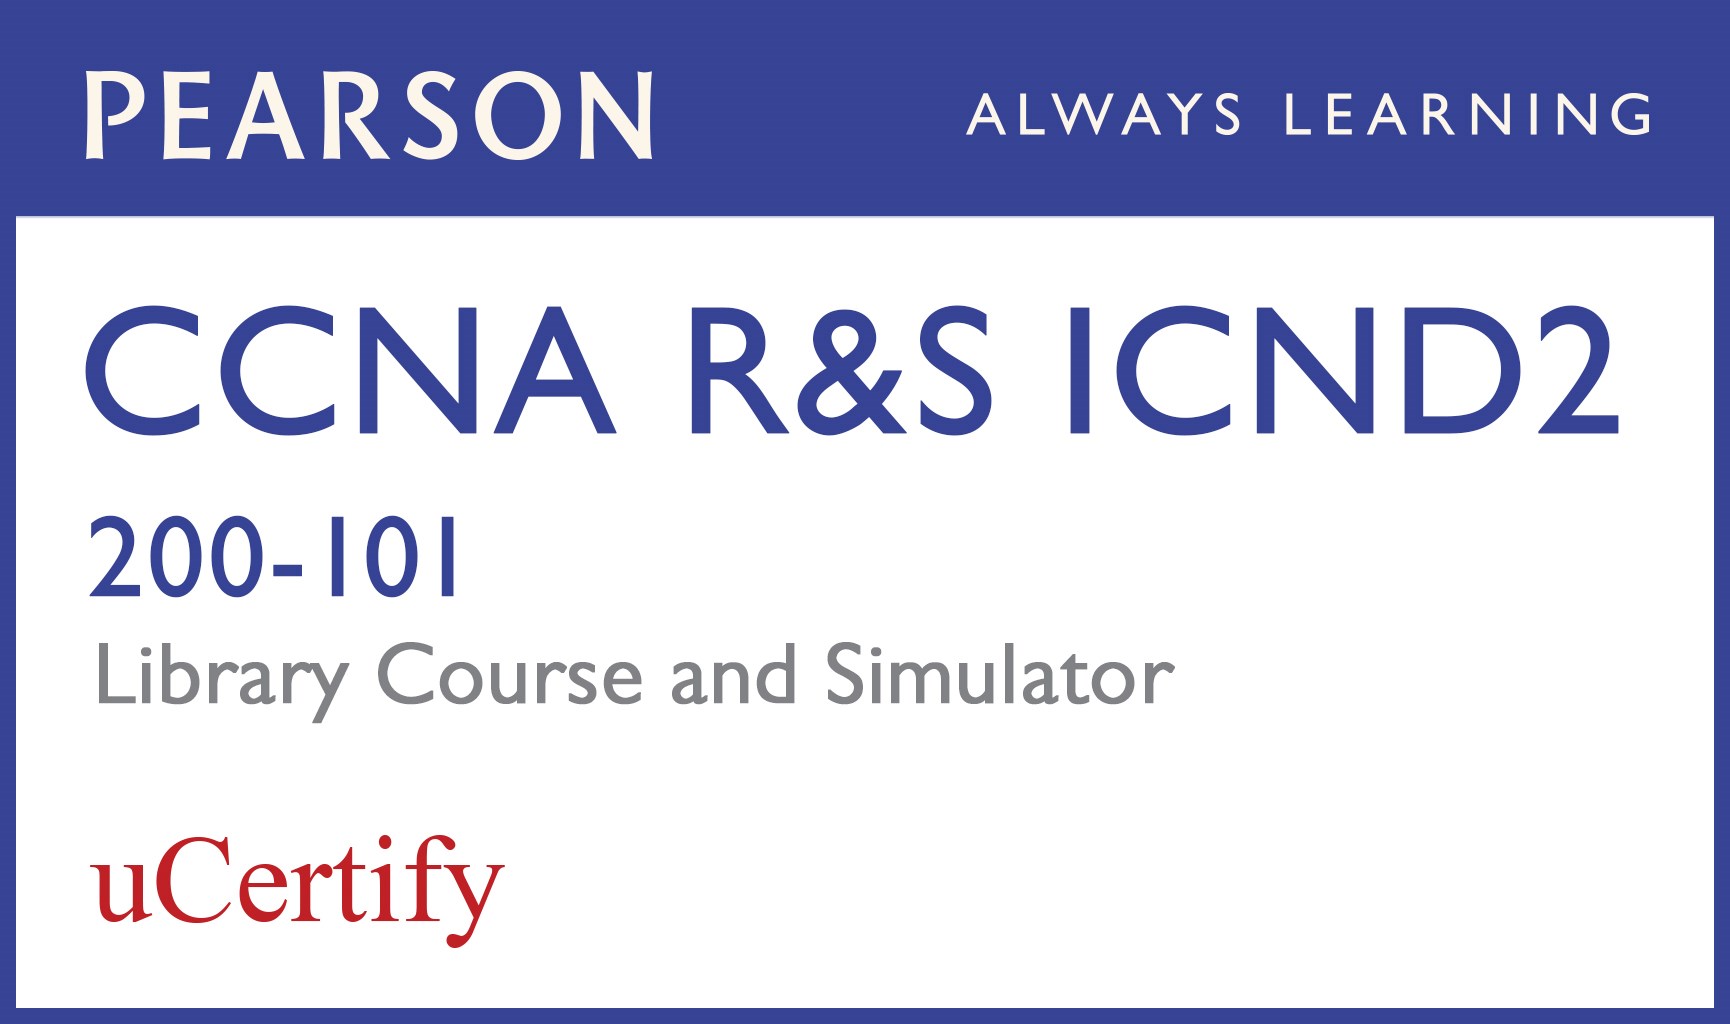 CCNA R&S 200-120 Library Pearson uCertify Course and Network Simulator Bundle